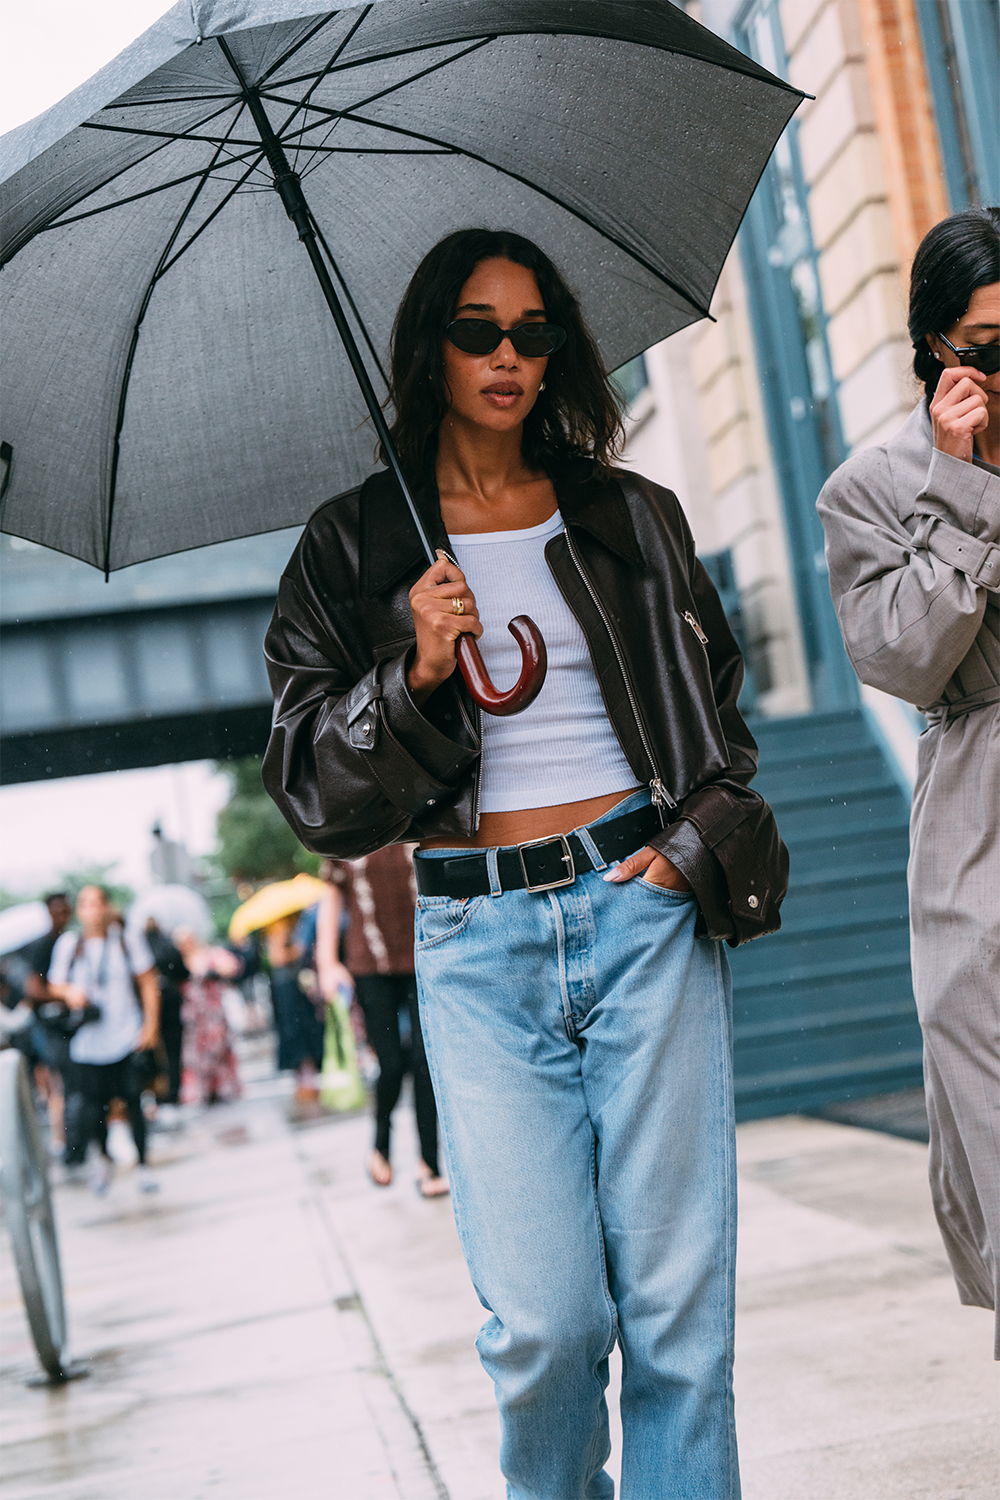 projector parallel te veel And Now, 8 Key New York Street Style Shopping Finds | Who What Wear